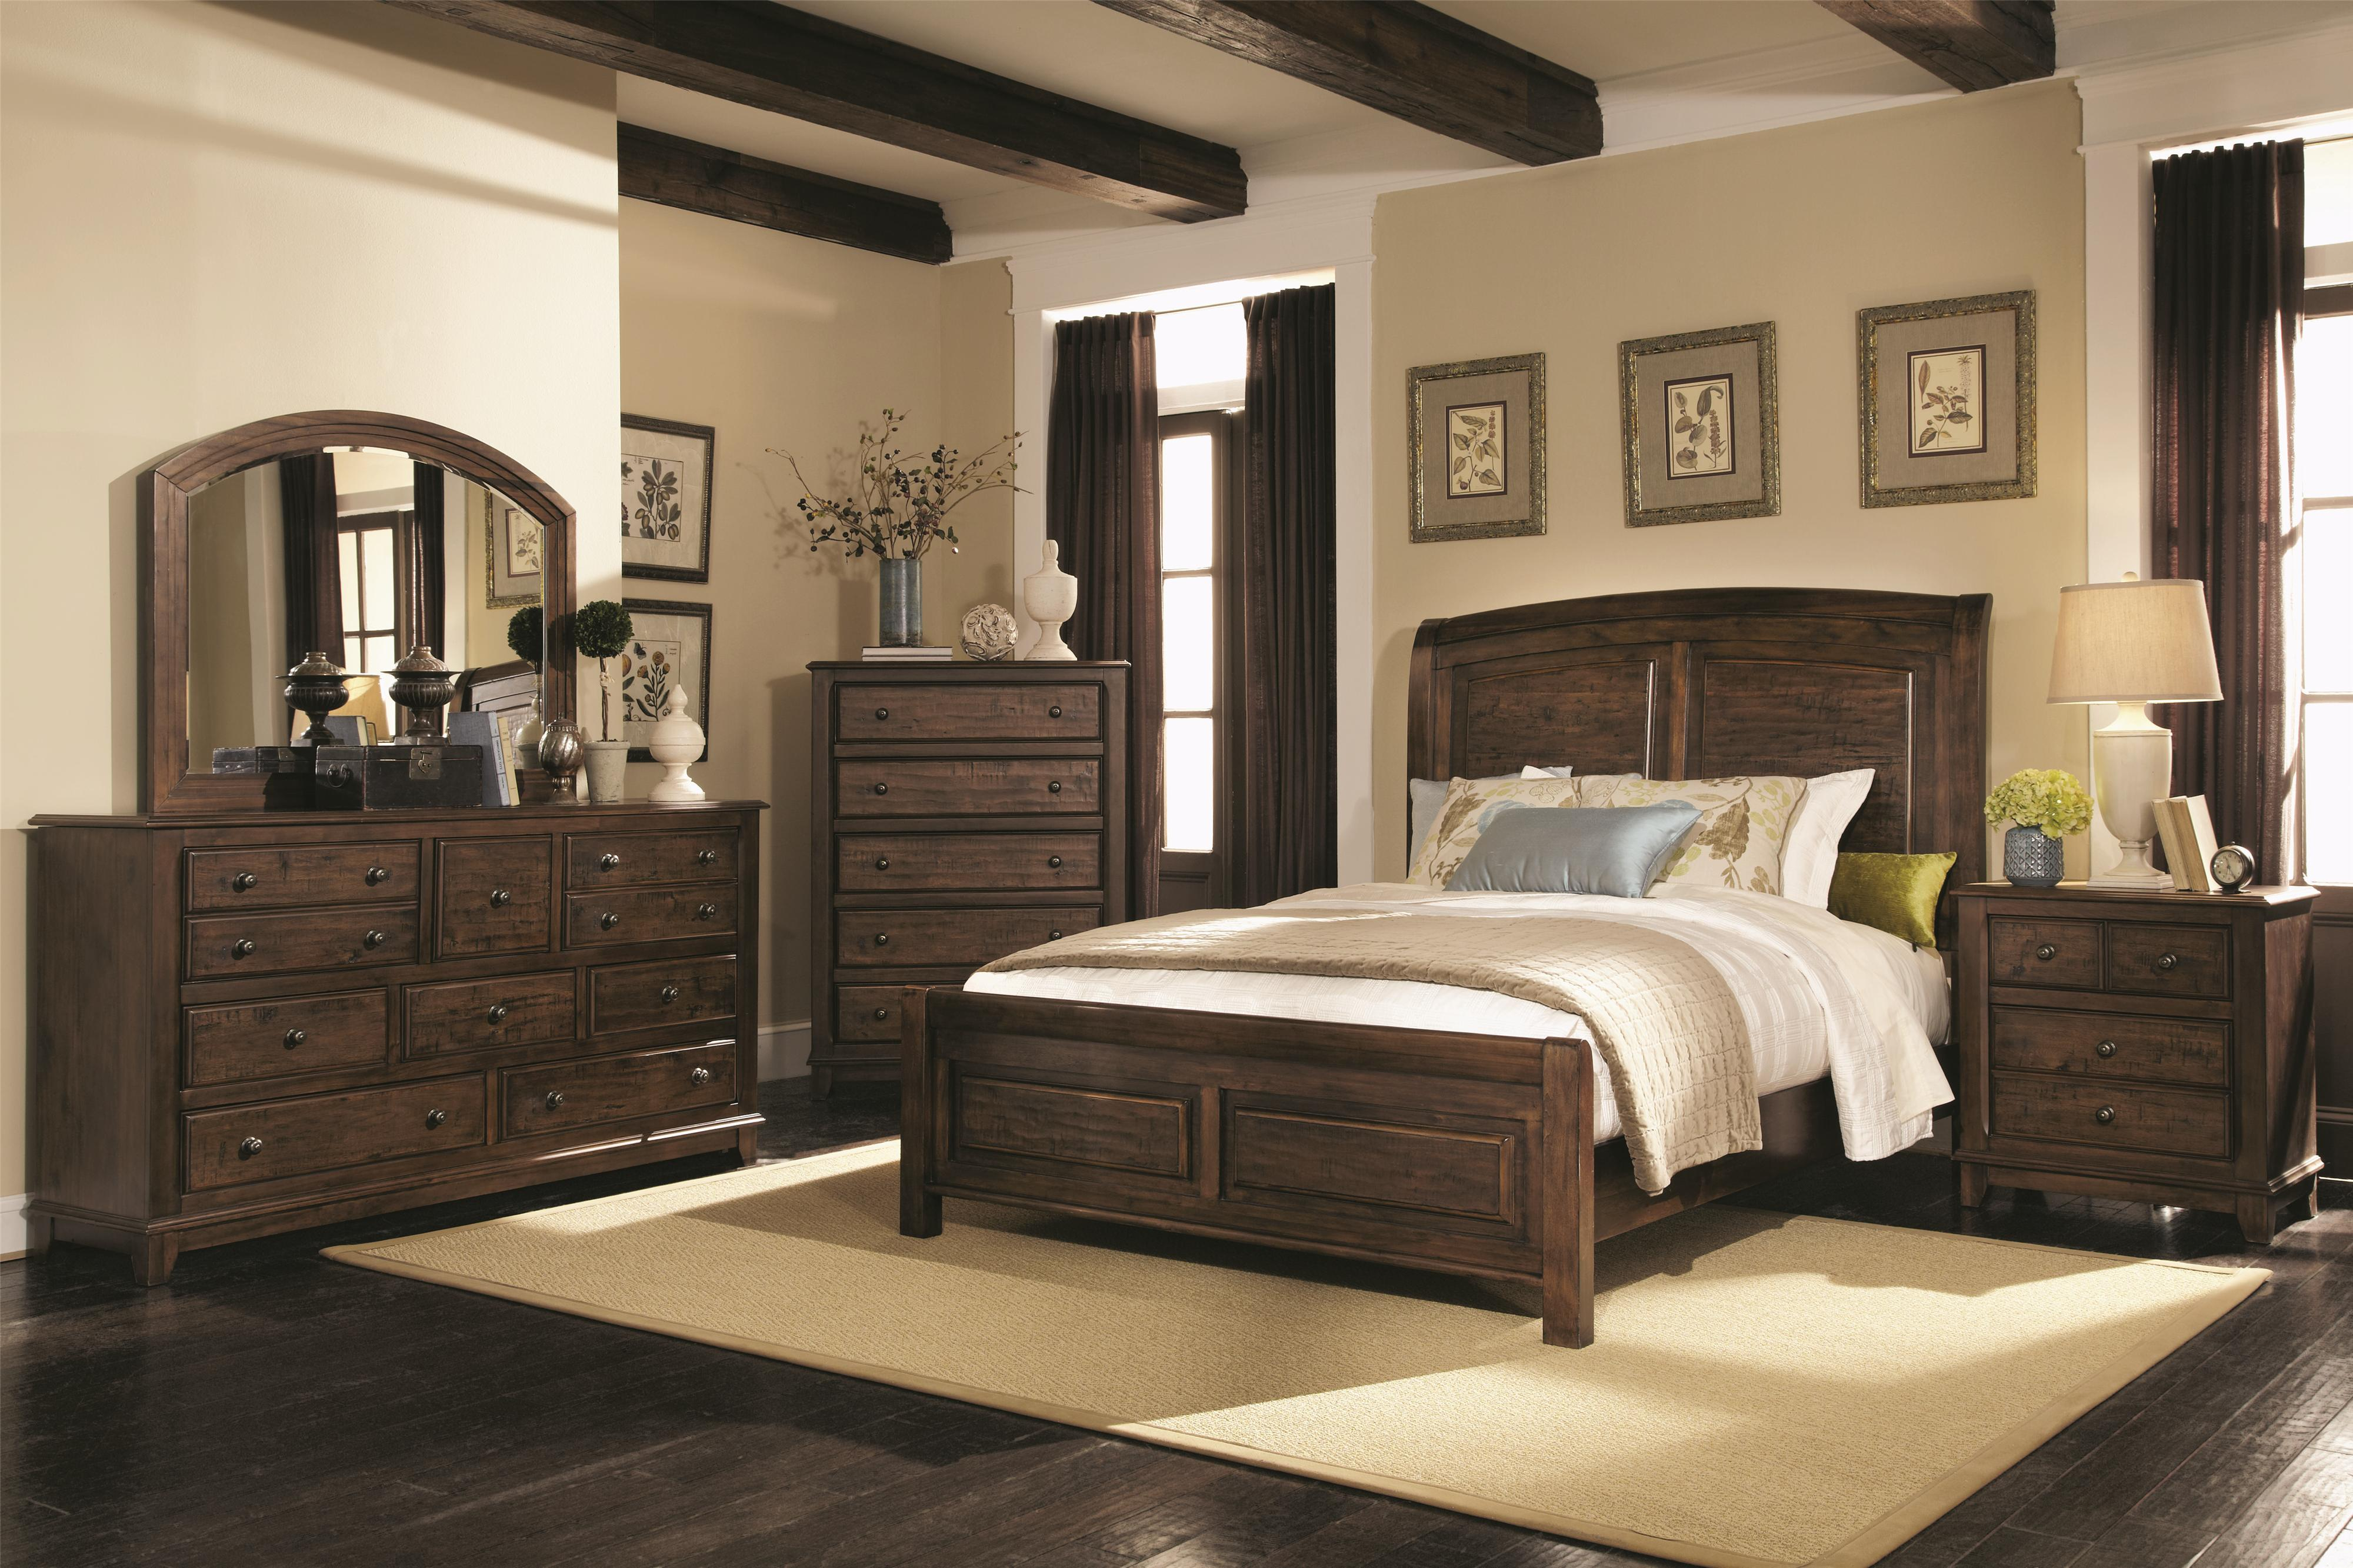 4 Piece Rustic Queen Sleigh Bedroom Group pertaining to proportions 4000 X 2666